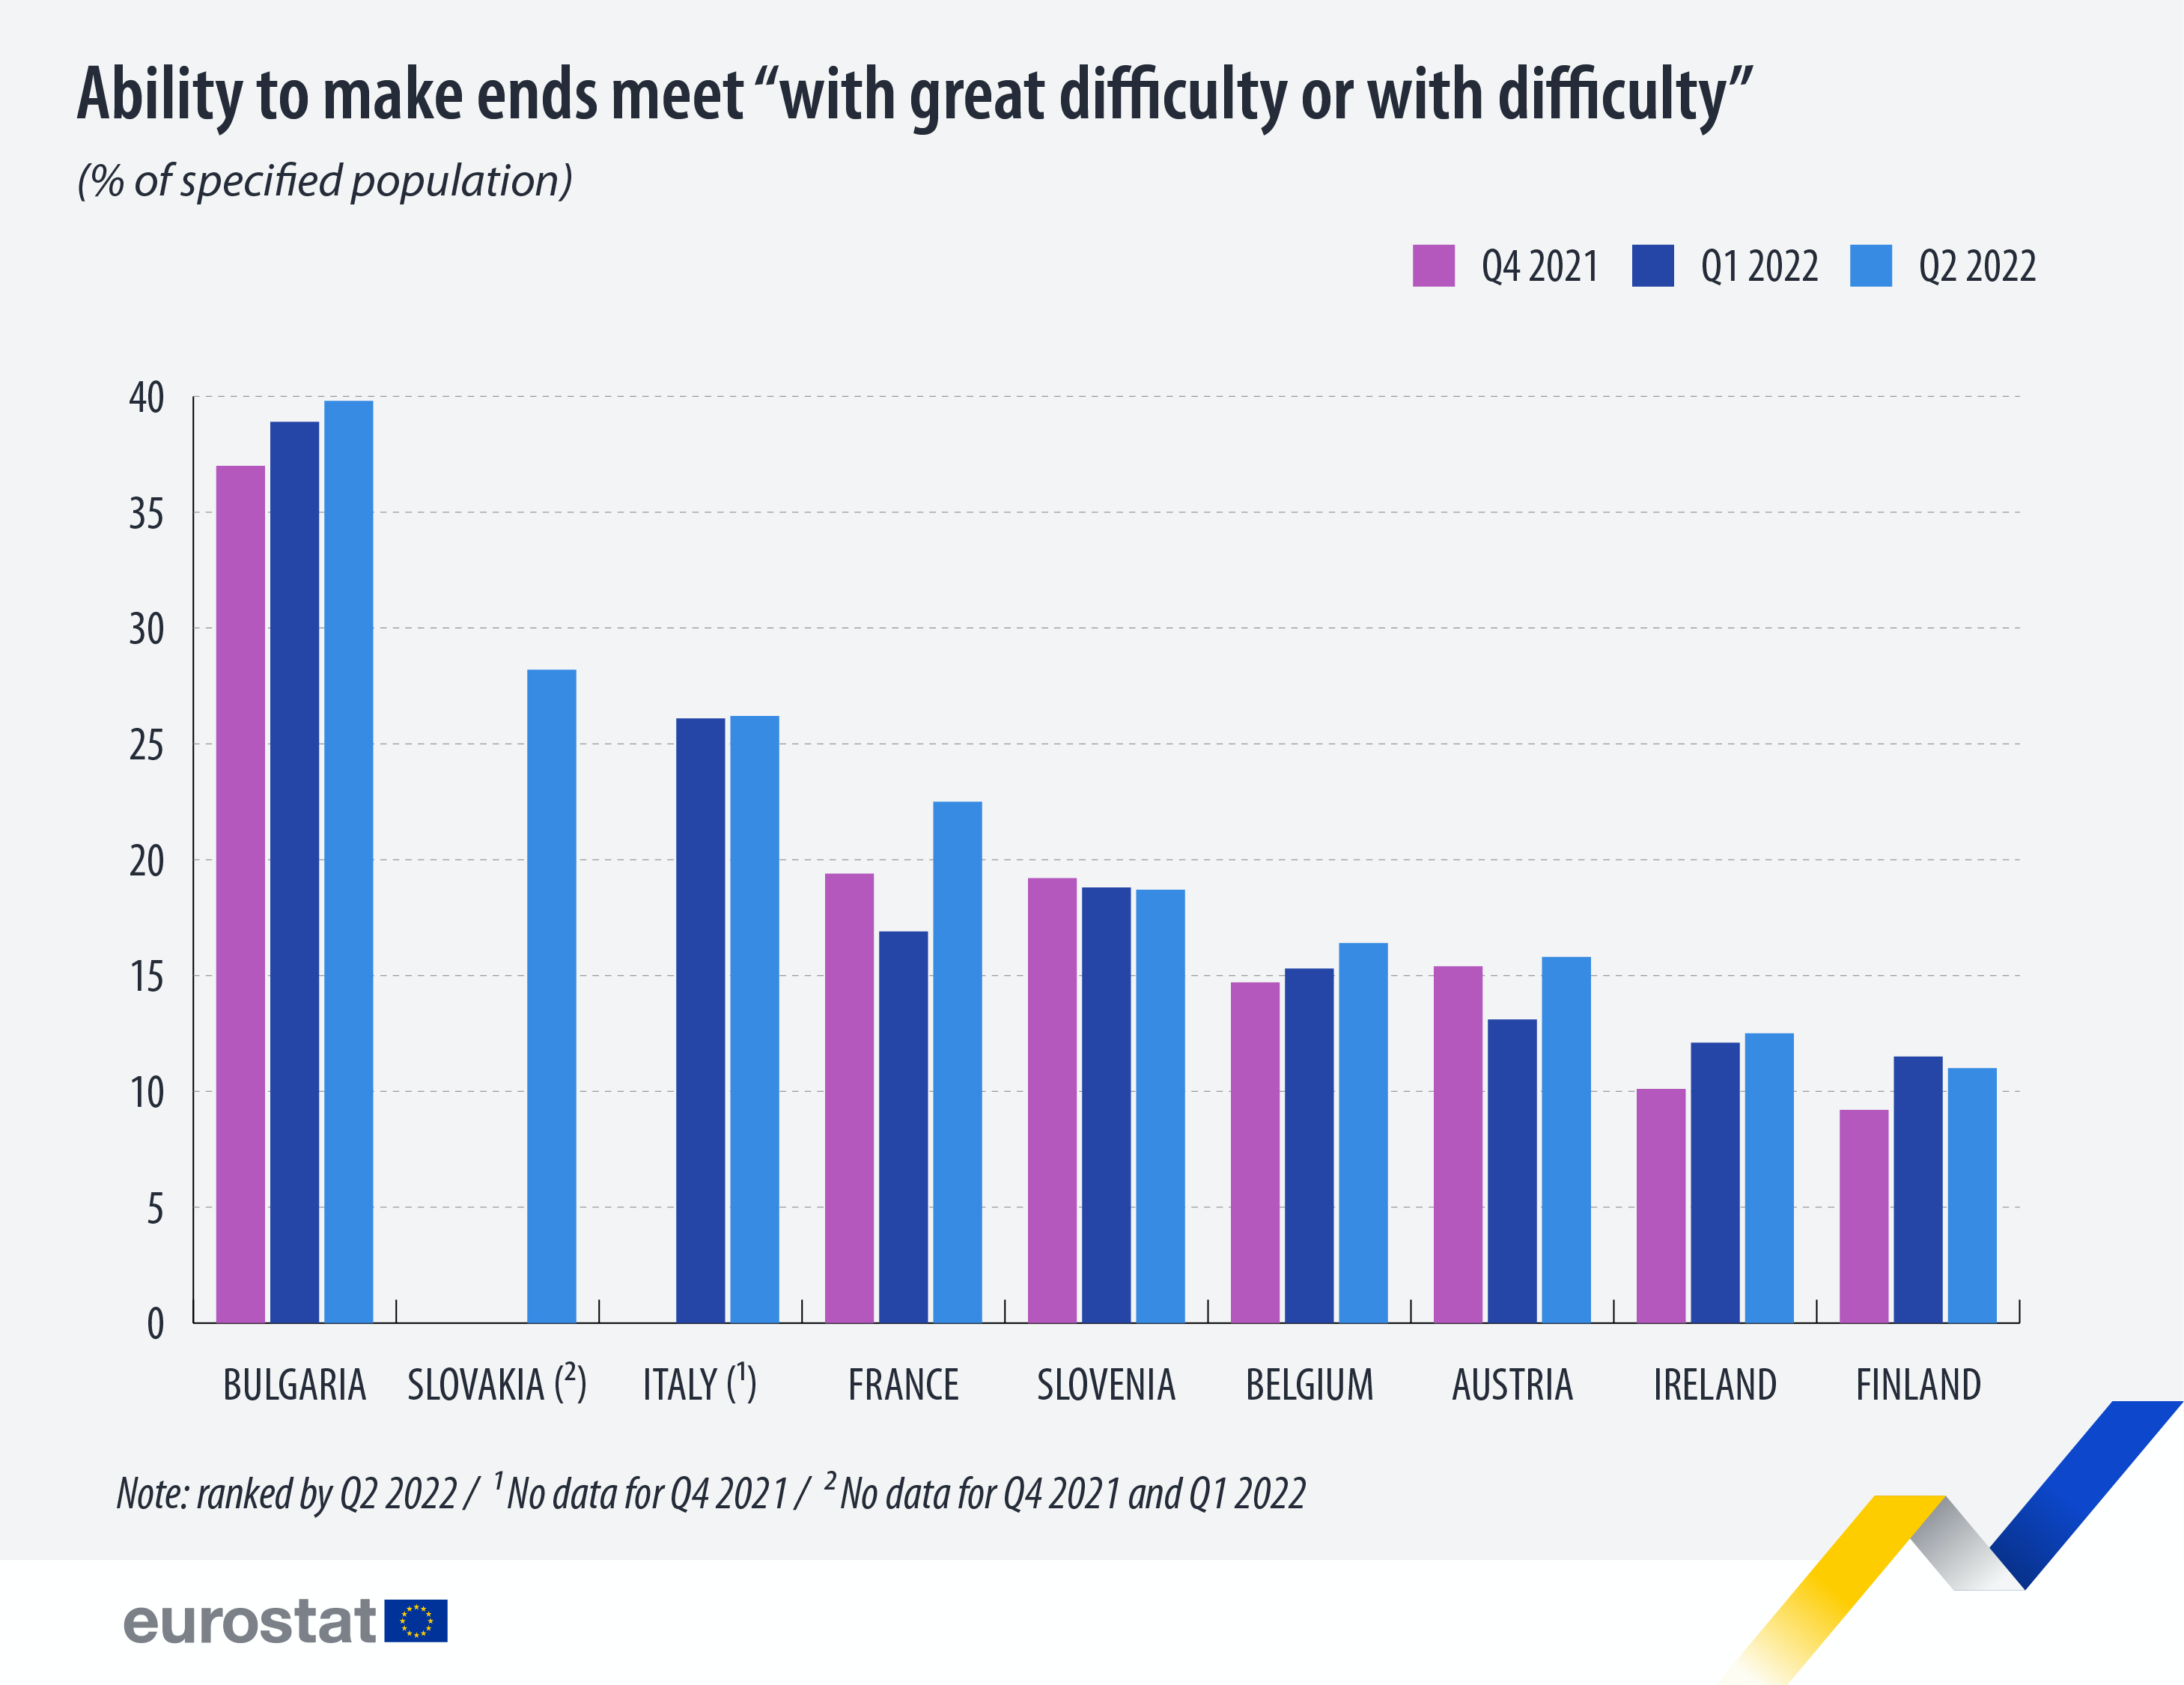 Bar chart: ability to make ends meet with "great difficulty or with difficulty" (% of specified population, Q4 2021, Q1 and Q2 2022)